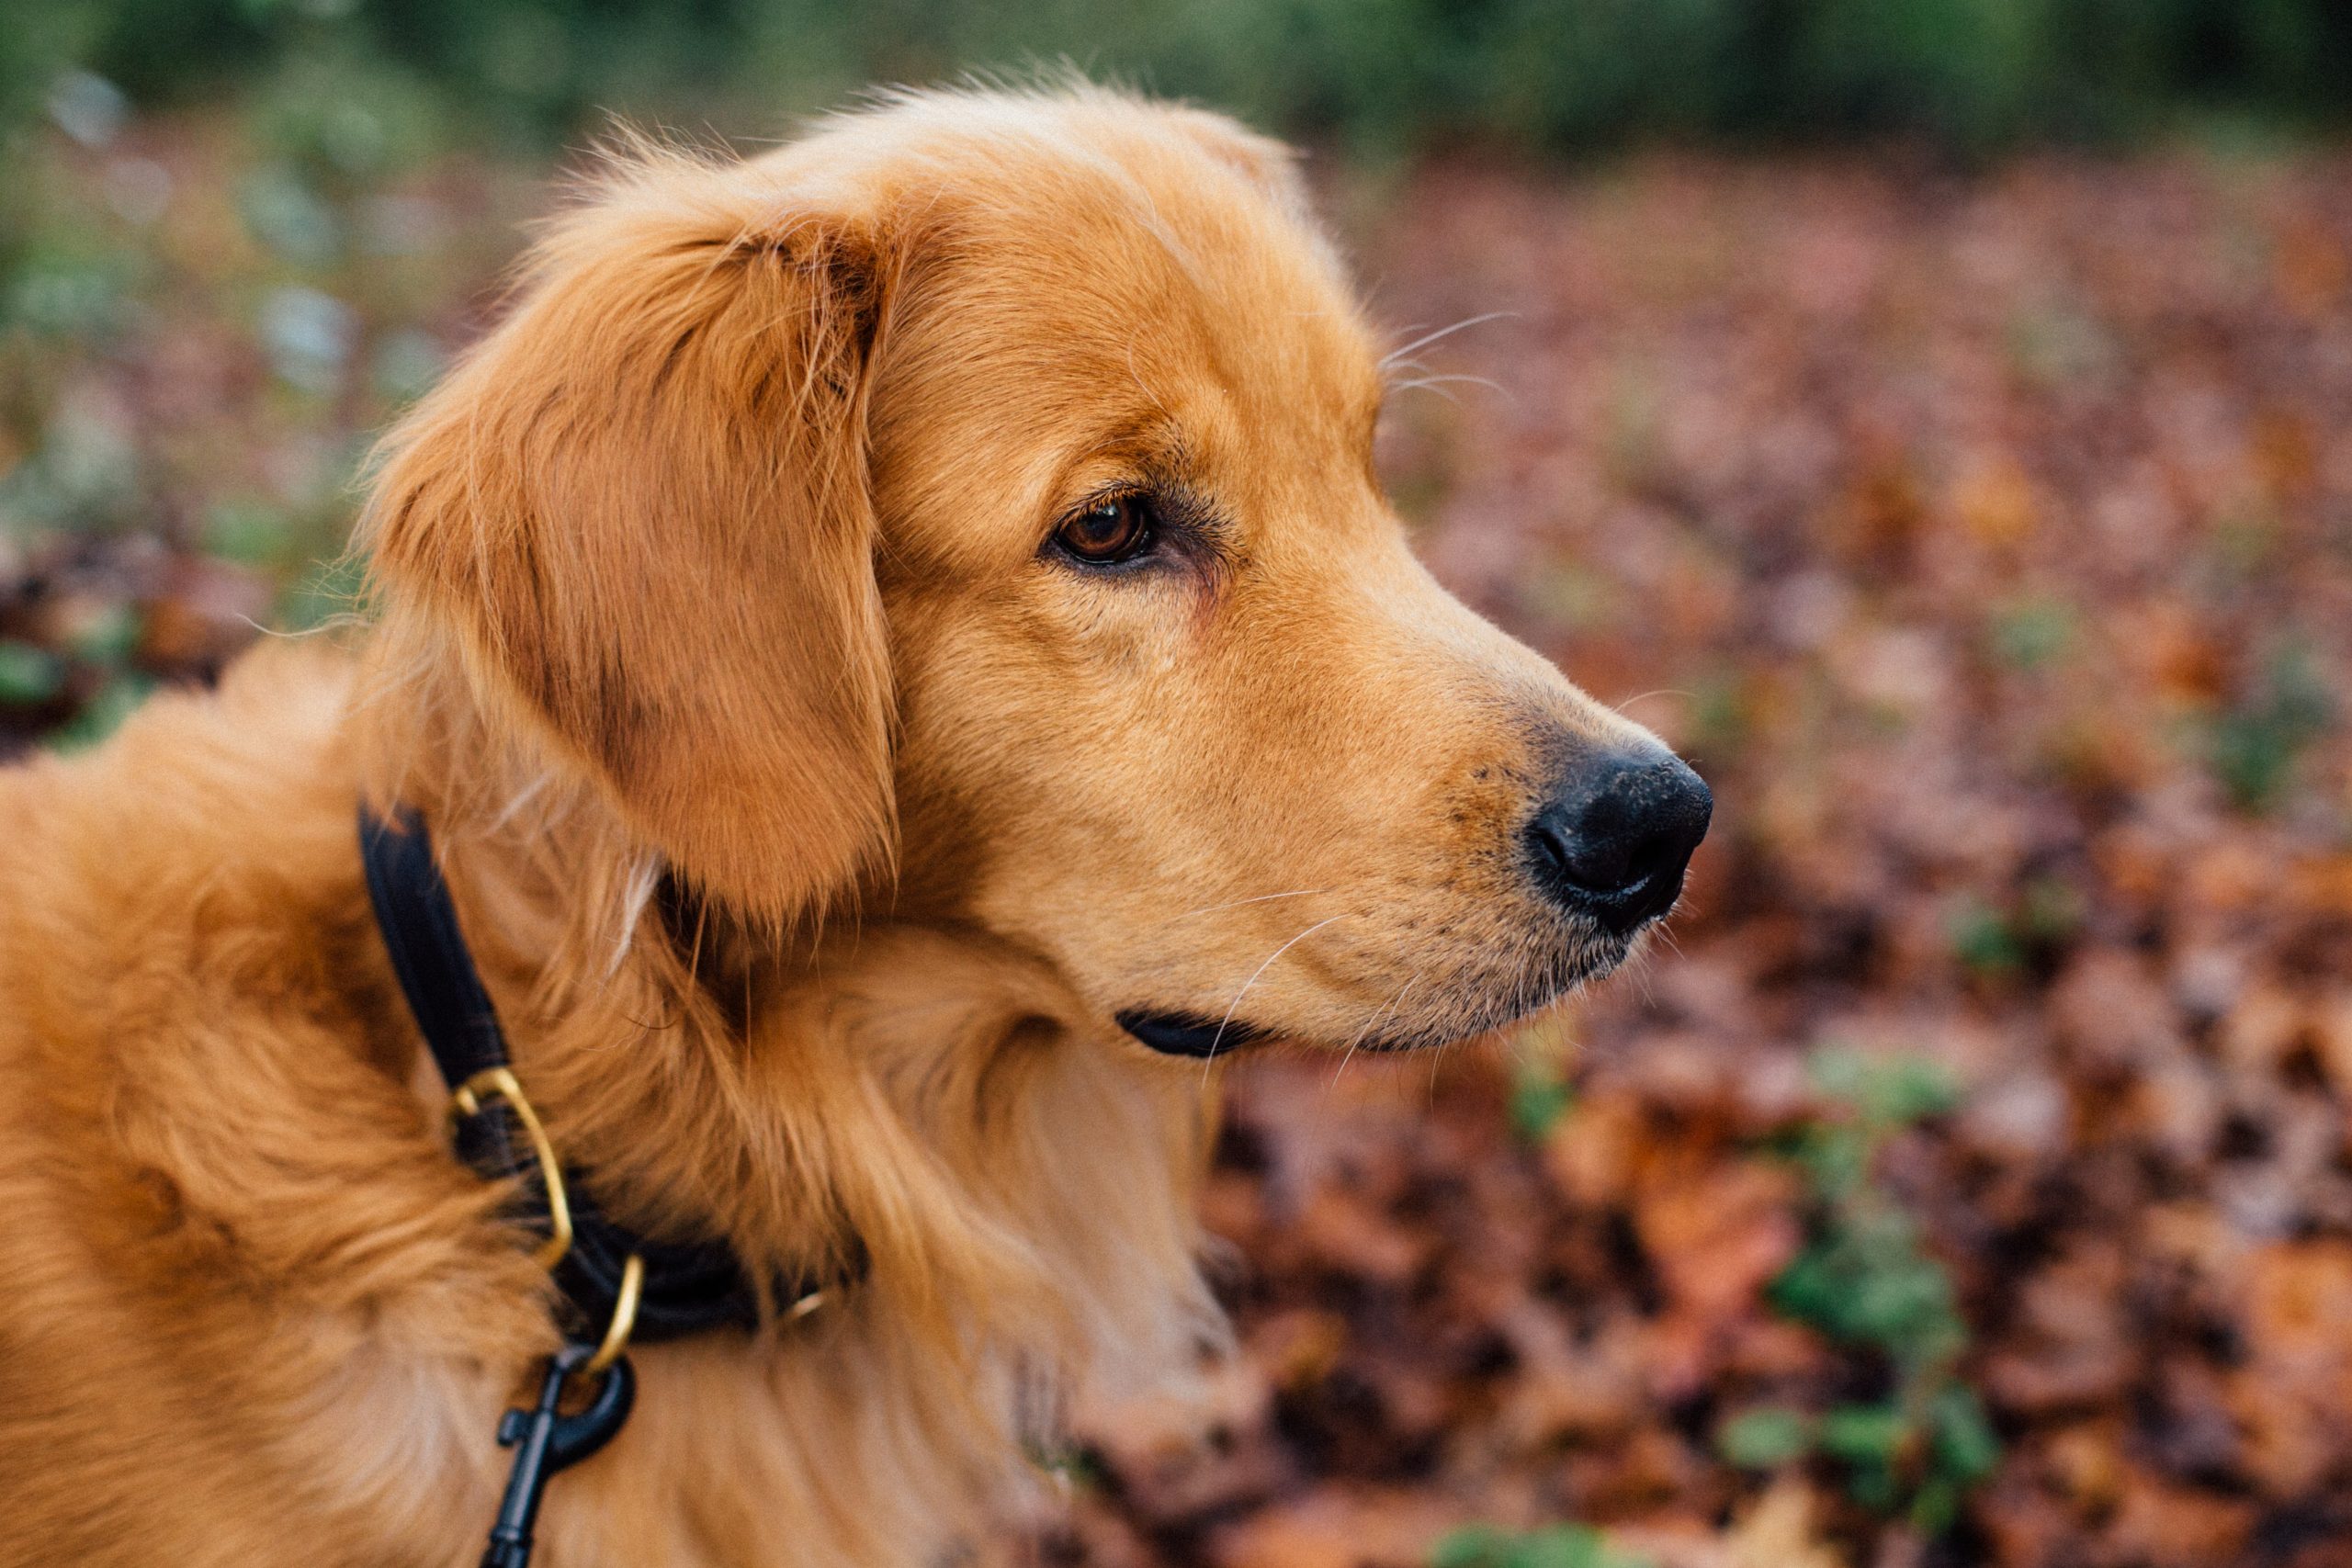 dog in autumn yard among leaves; Photo by Tanner Vines on Unsplash